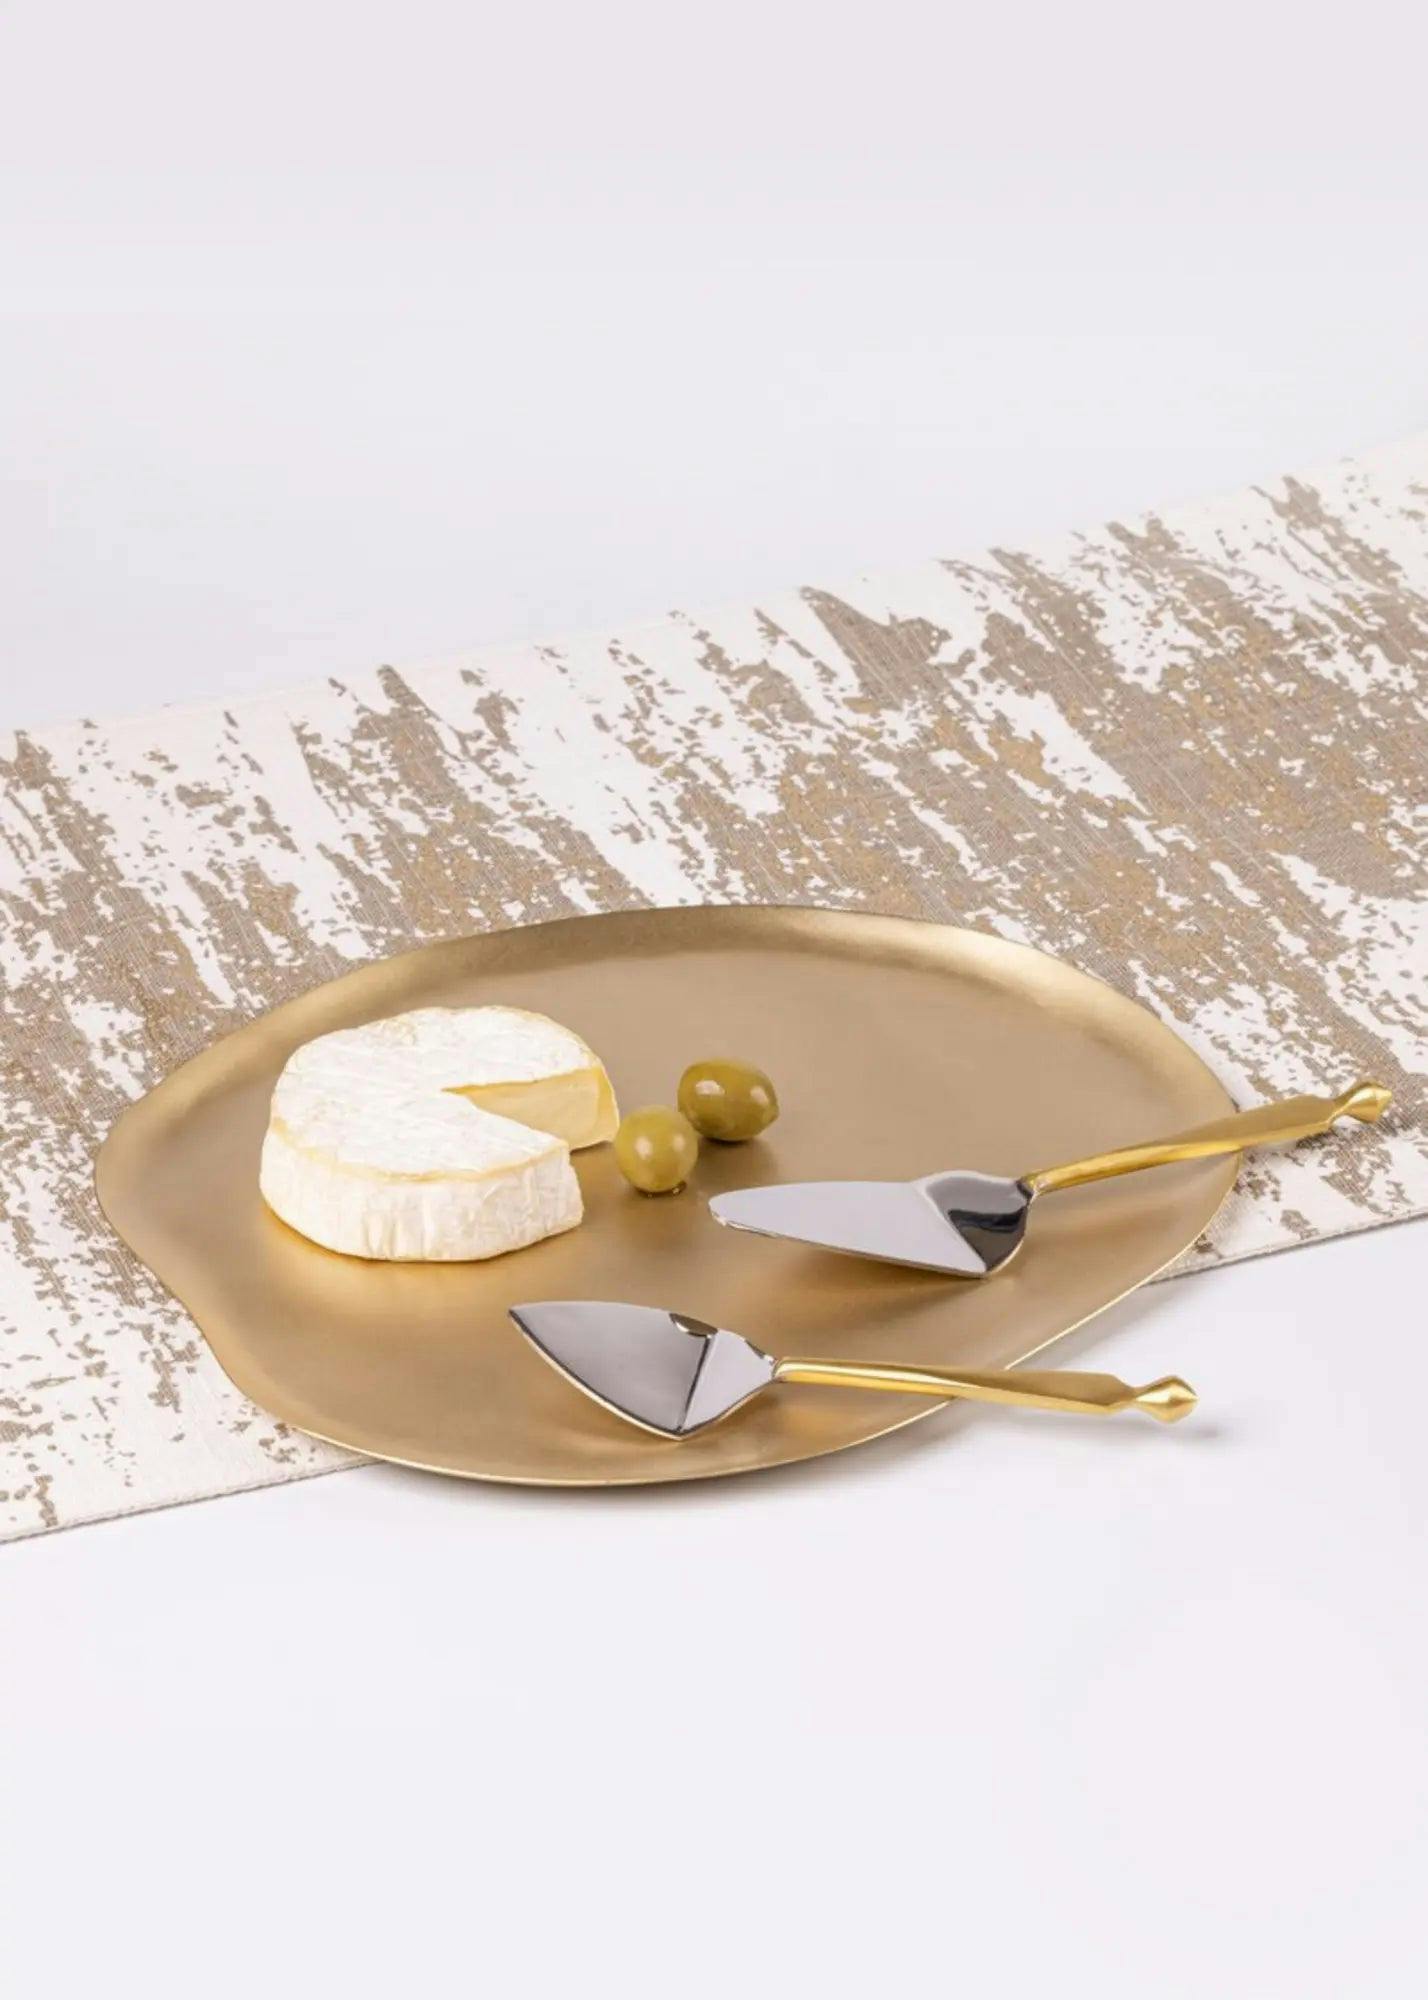 Primary image of Haifa Brass Platter, a product by Gado Living